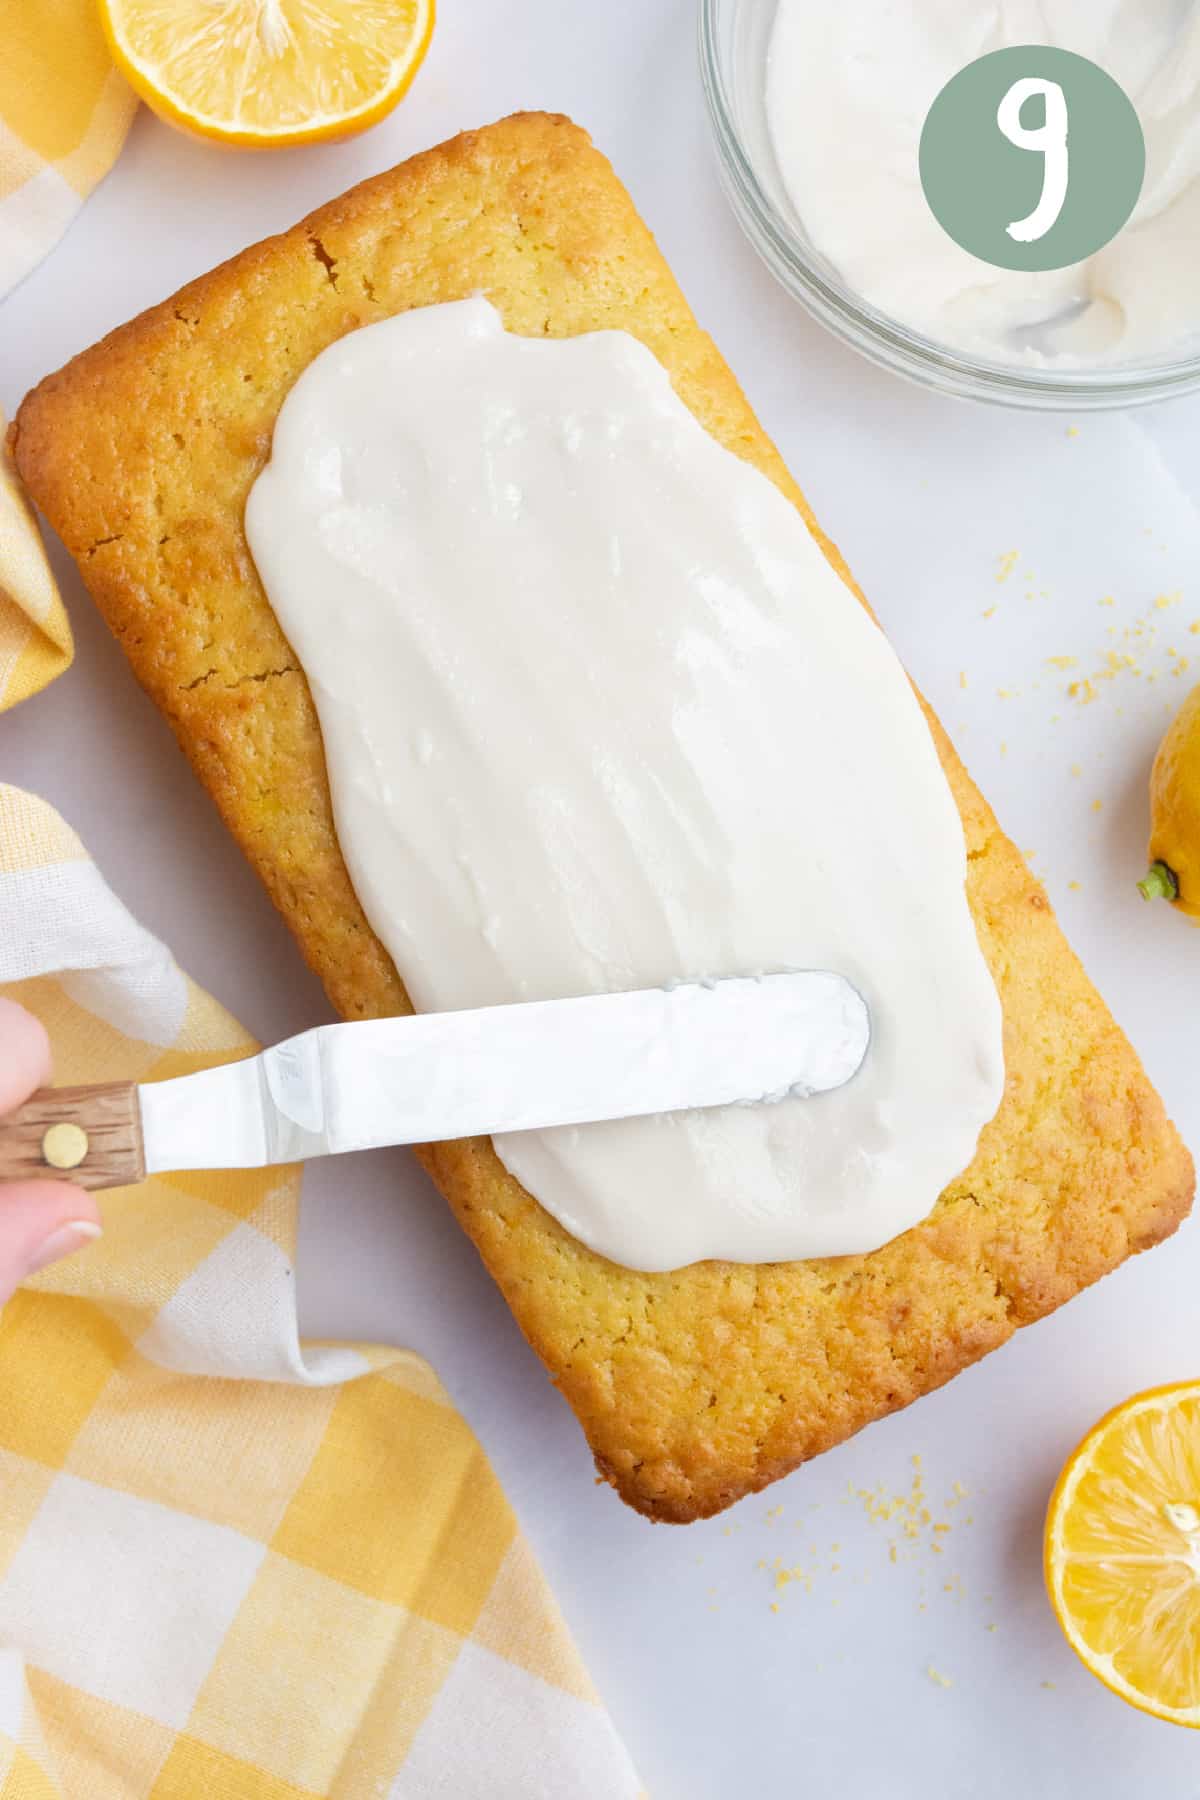 A spatula spreading icing over a vegan lemon loaf.  There is also a glass bowl of icing and a few cut lemons around the loaf.